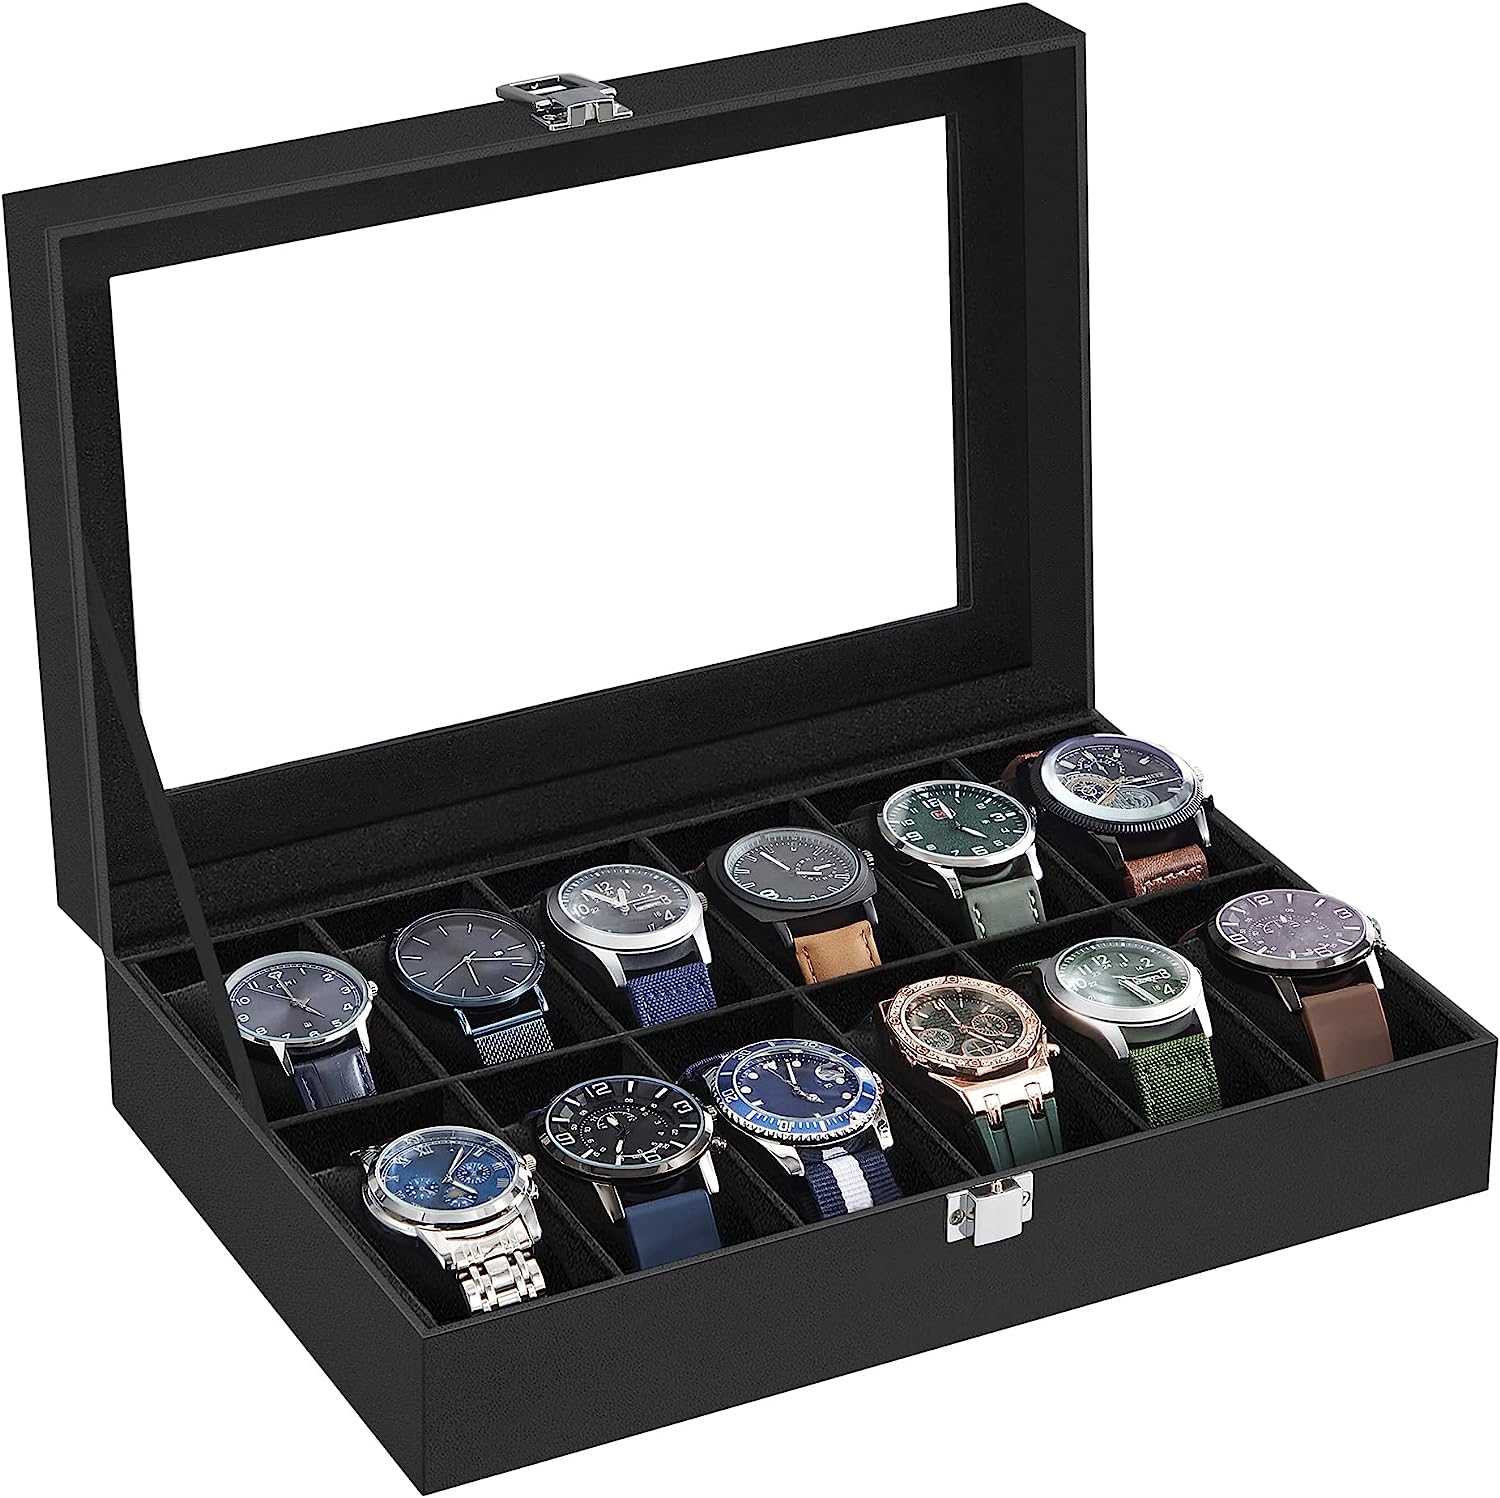 Blushbees® 6-Slot Watch Box - Black Synthetic Leather with Gray Lining